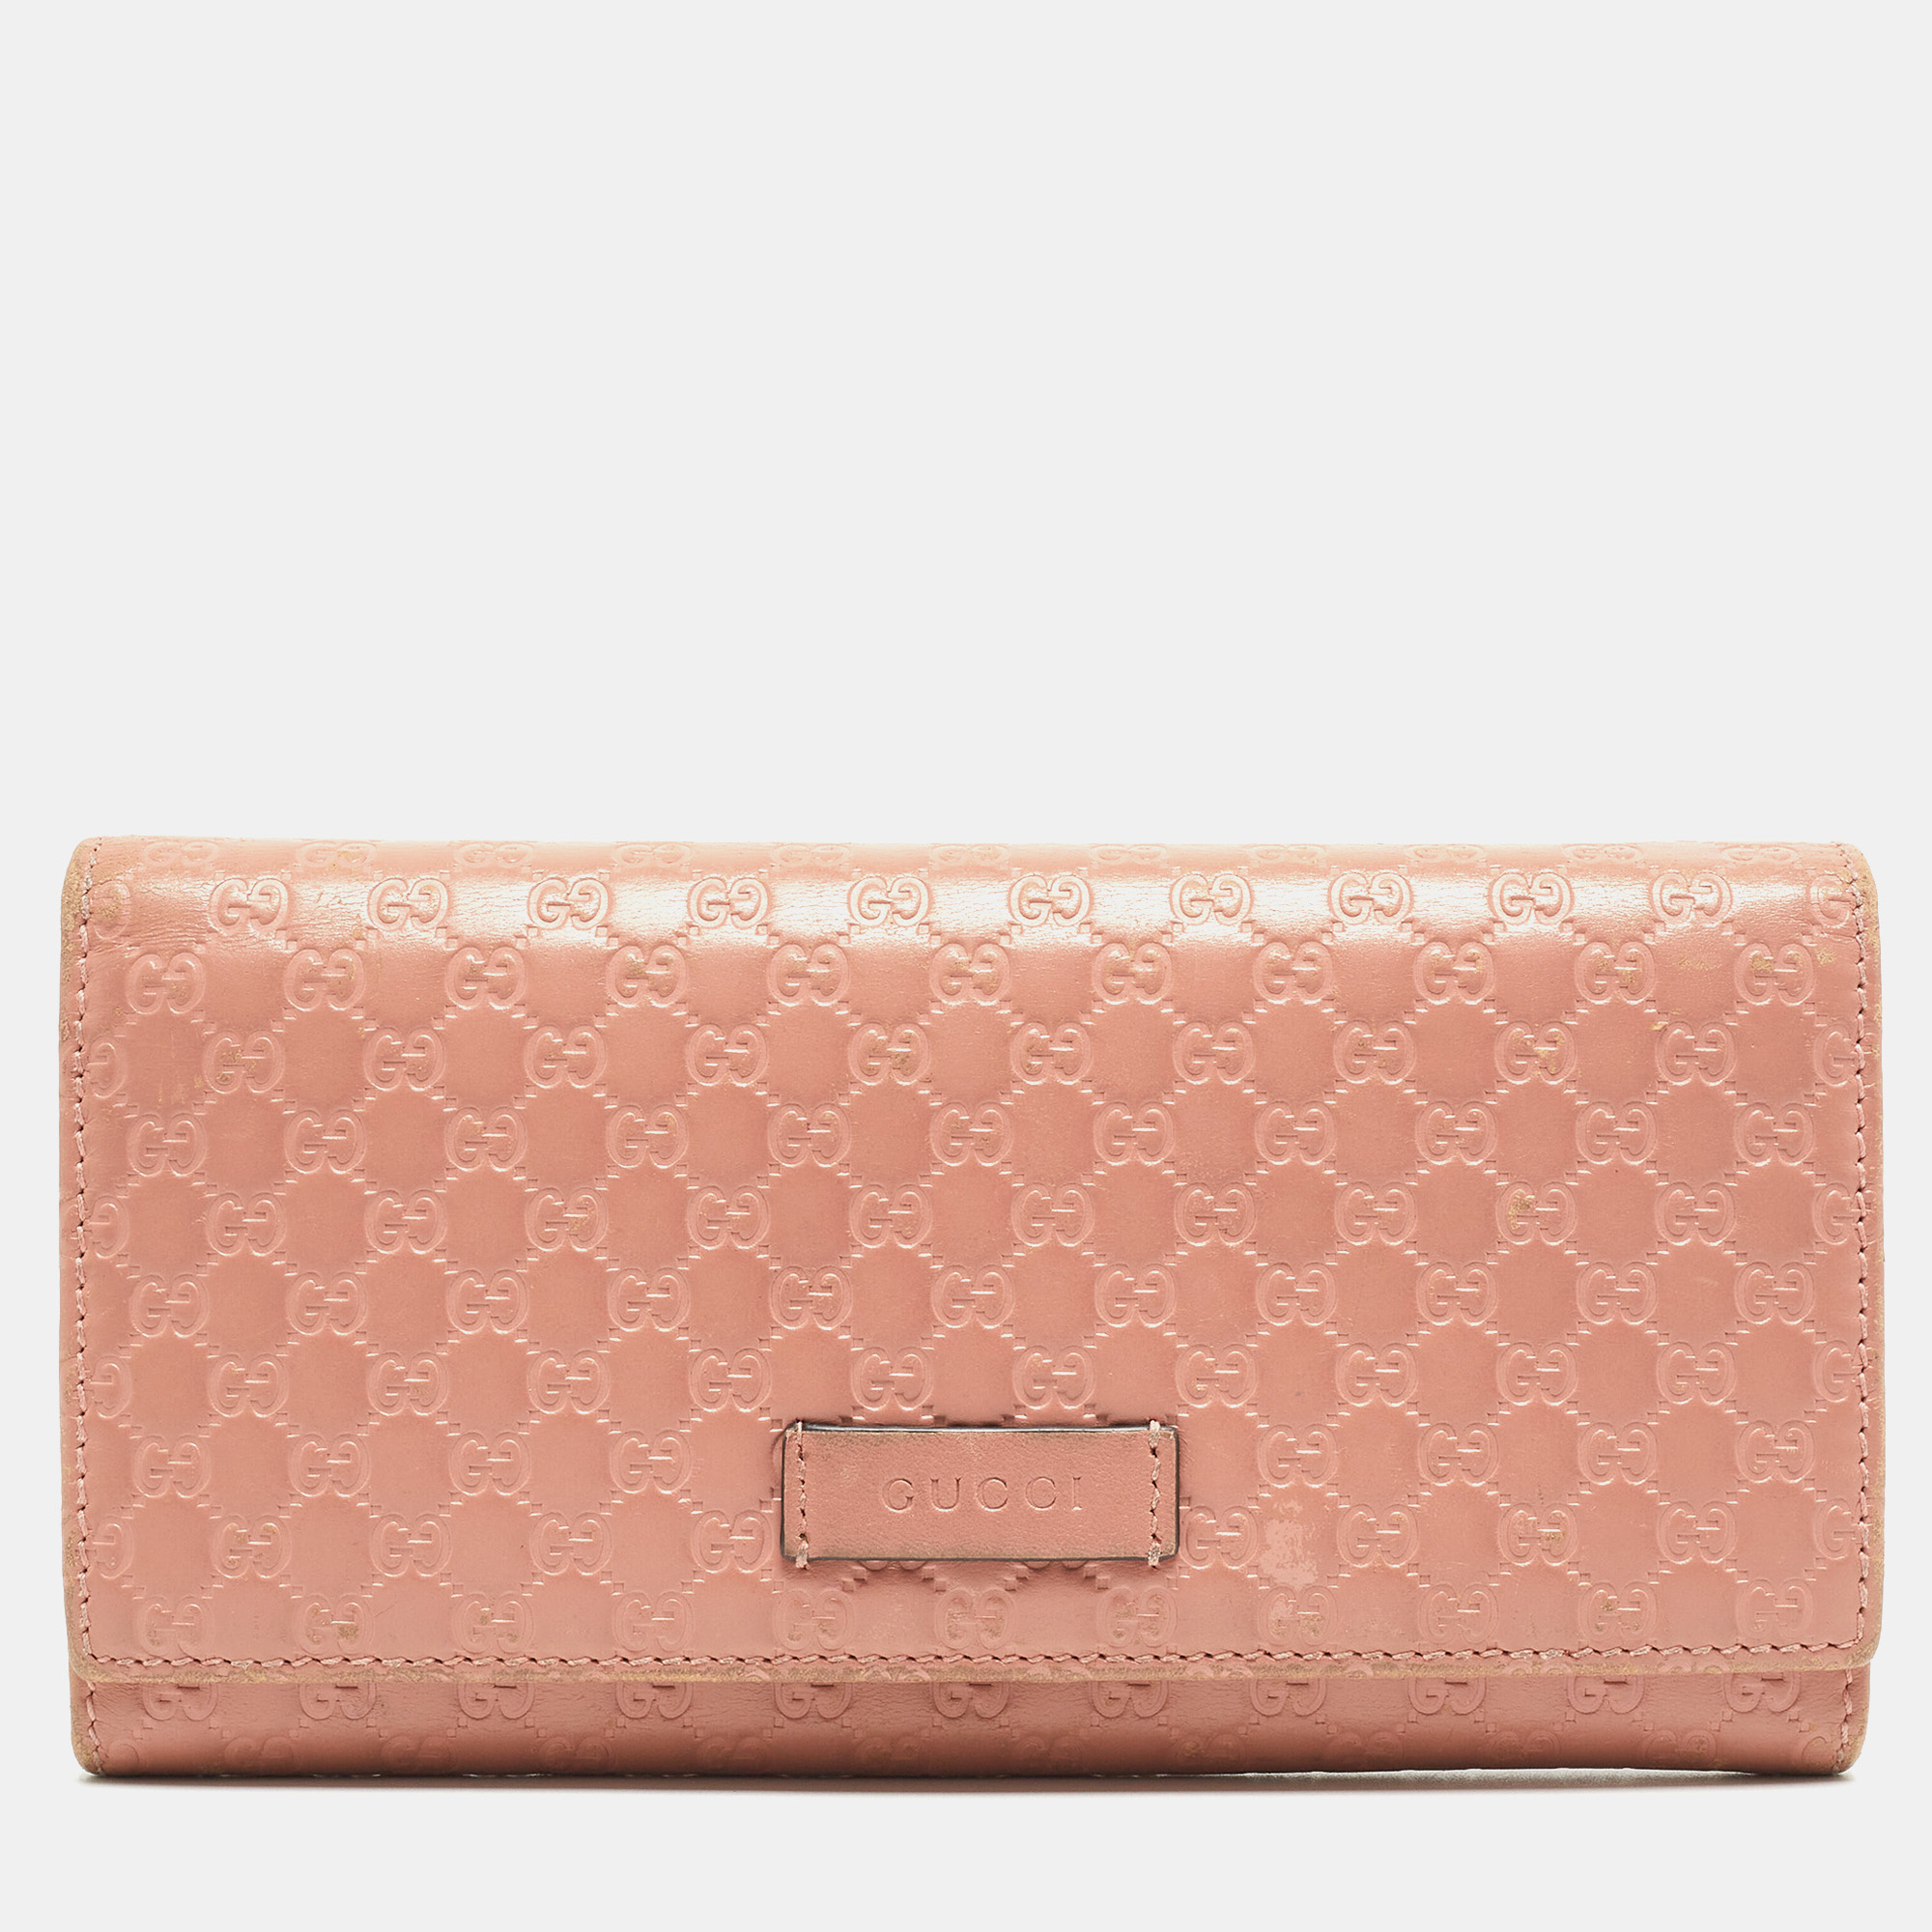 Pre-owned Gucci Pink Microgucissima Leather Flap Continental Wallet